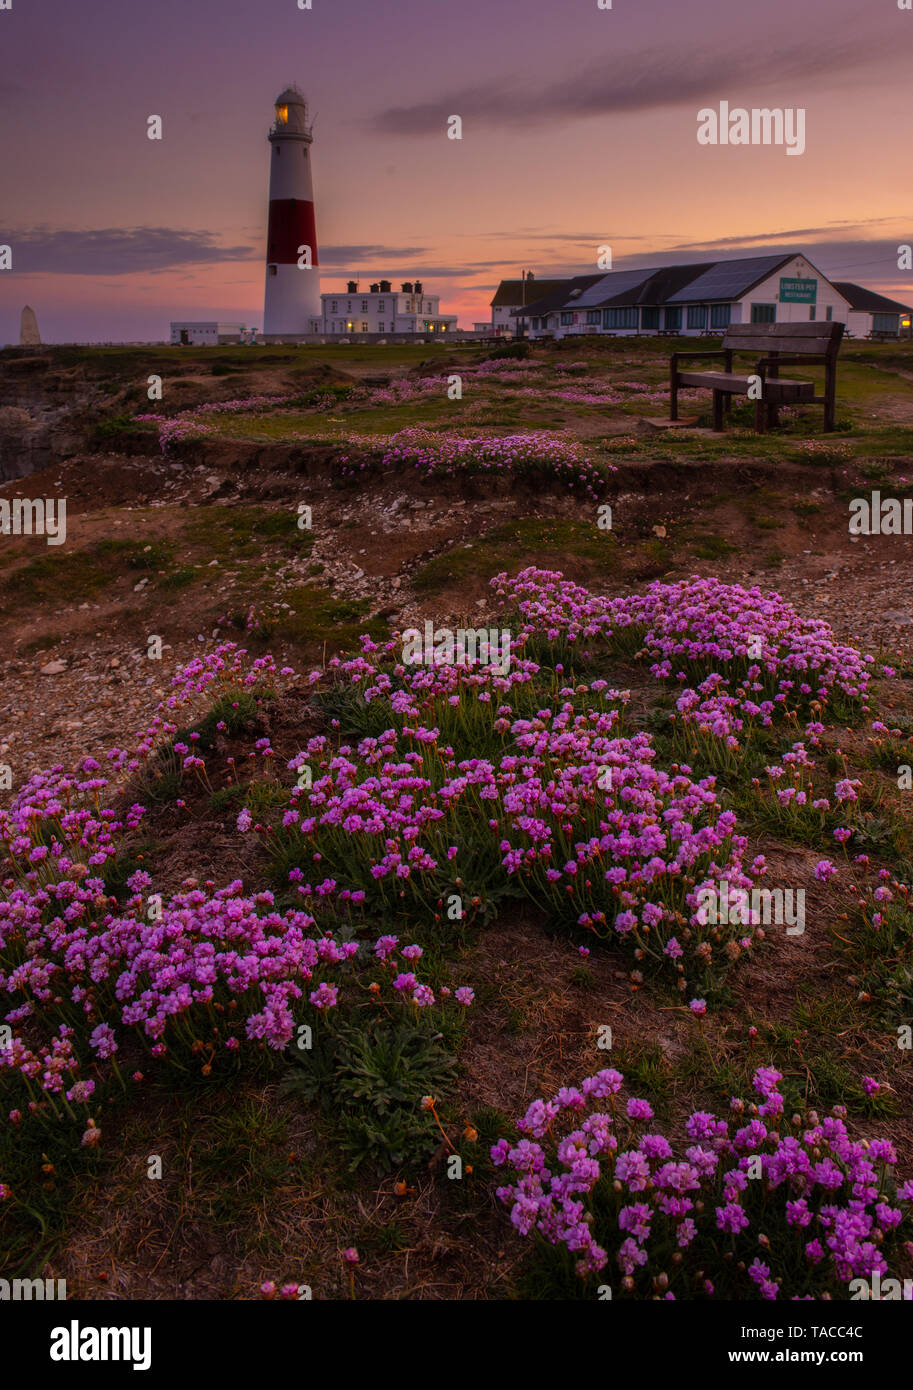 Portland, Dorset, UK. 23rd May 2019. UK Weather: The sun sets behind the iconic Portland Bill lighthouse on the Isle of Portland at the end of a beautiful spring day.  The delicate pink sea thrift flowers are in full bloom making the lighthouse particularly picturesque at this time of year.  Credit: Celia McMahon/Alamy Live News. Stock Photo